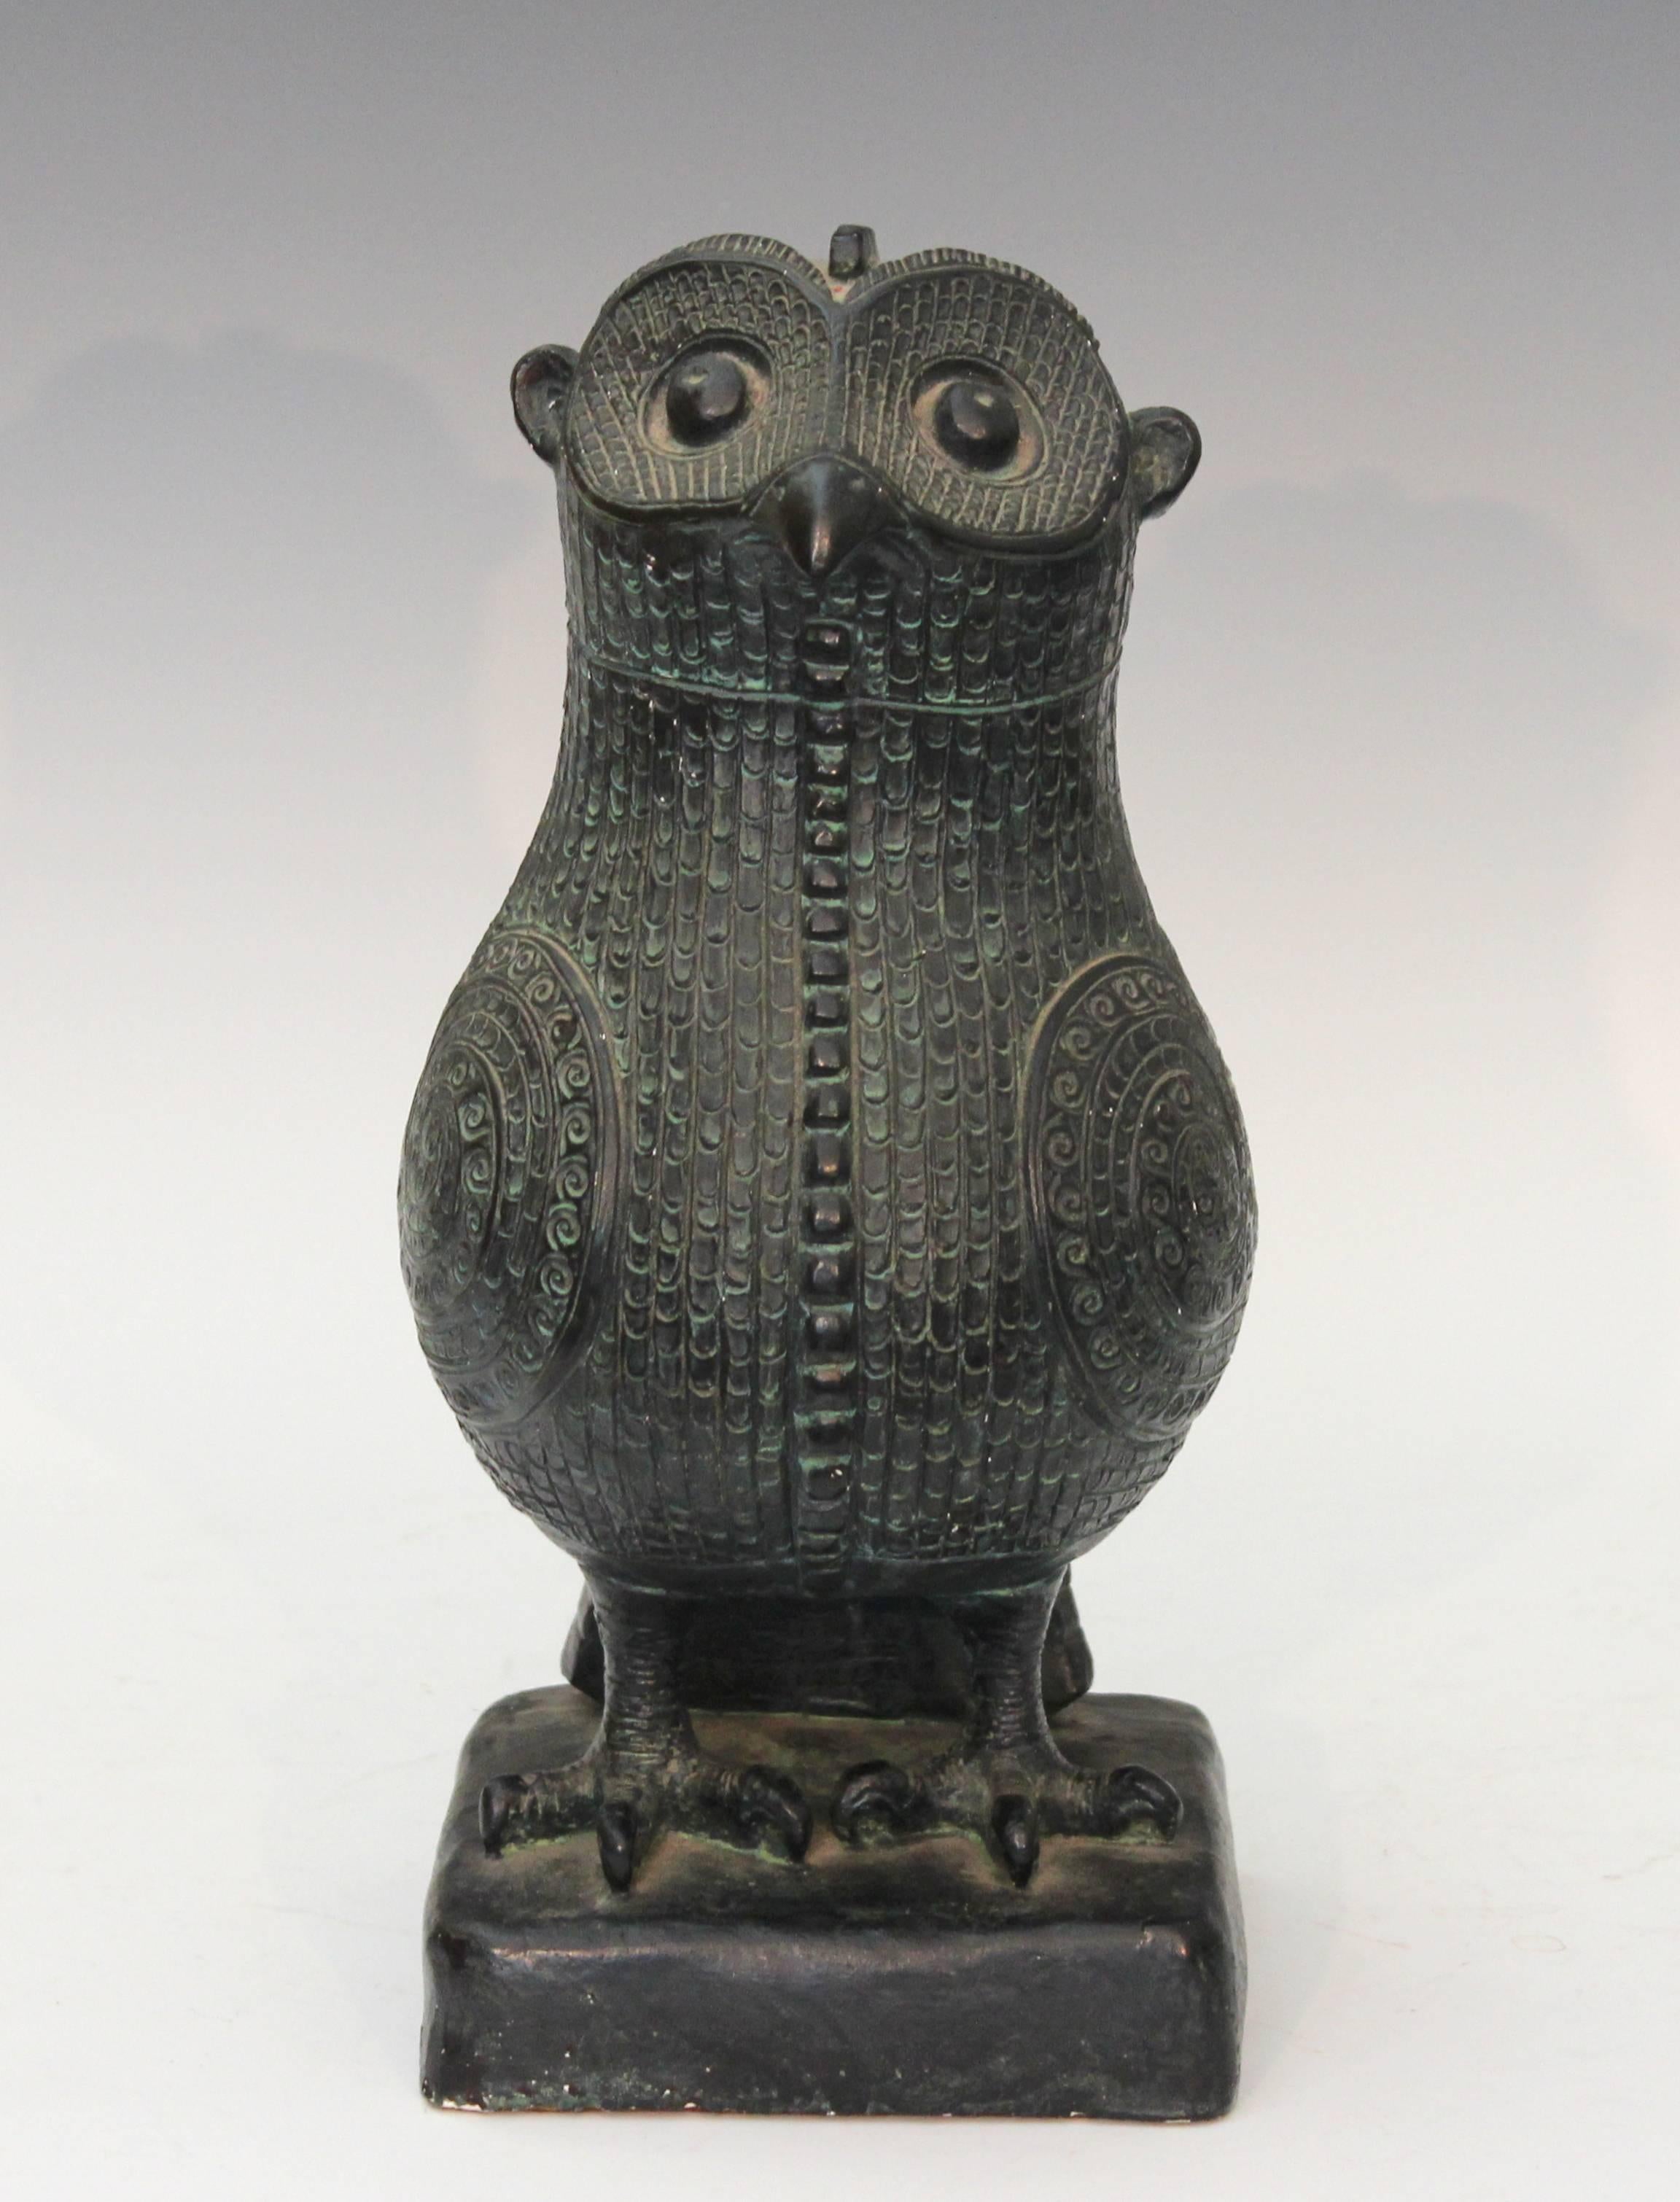 Nice quality vintage painted plaster reproduction of ancient Chinese Shang Dynasty bronze owl. By Austin Products. Dated 1965. Crisp detail with convincing black/green painted finish in the manner of James Mont. Heavy for size, seems to be solid